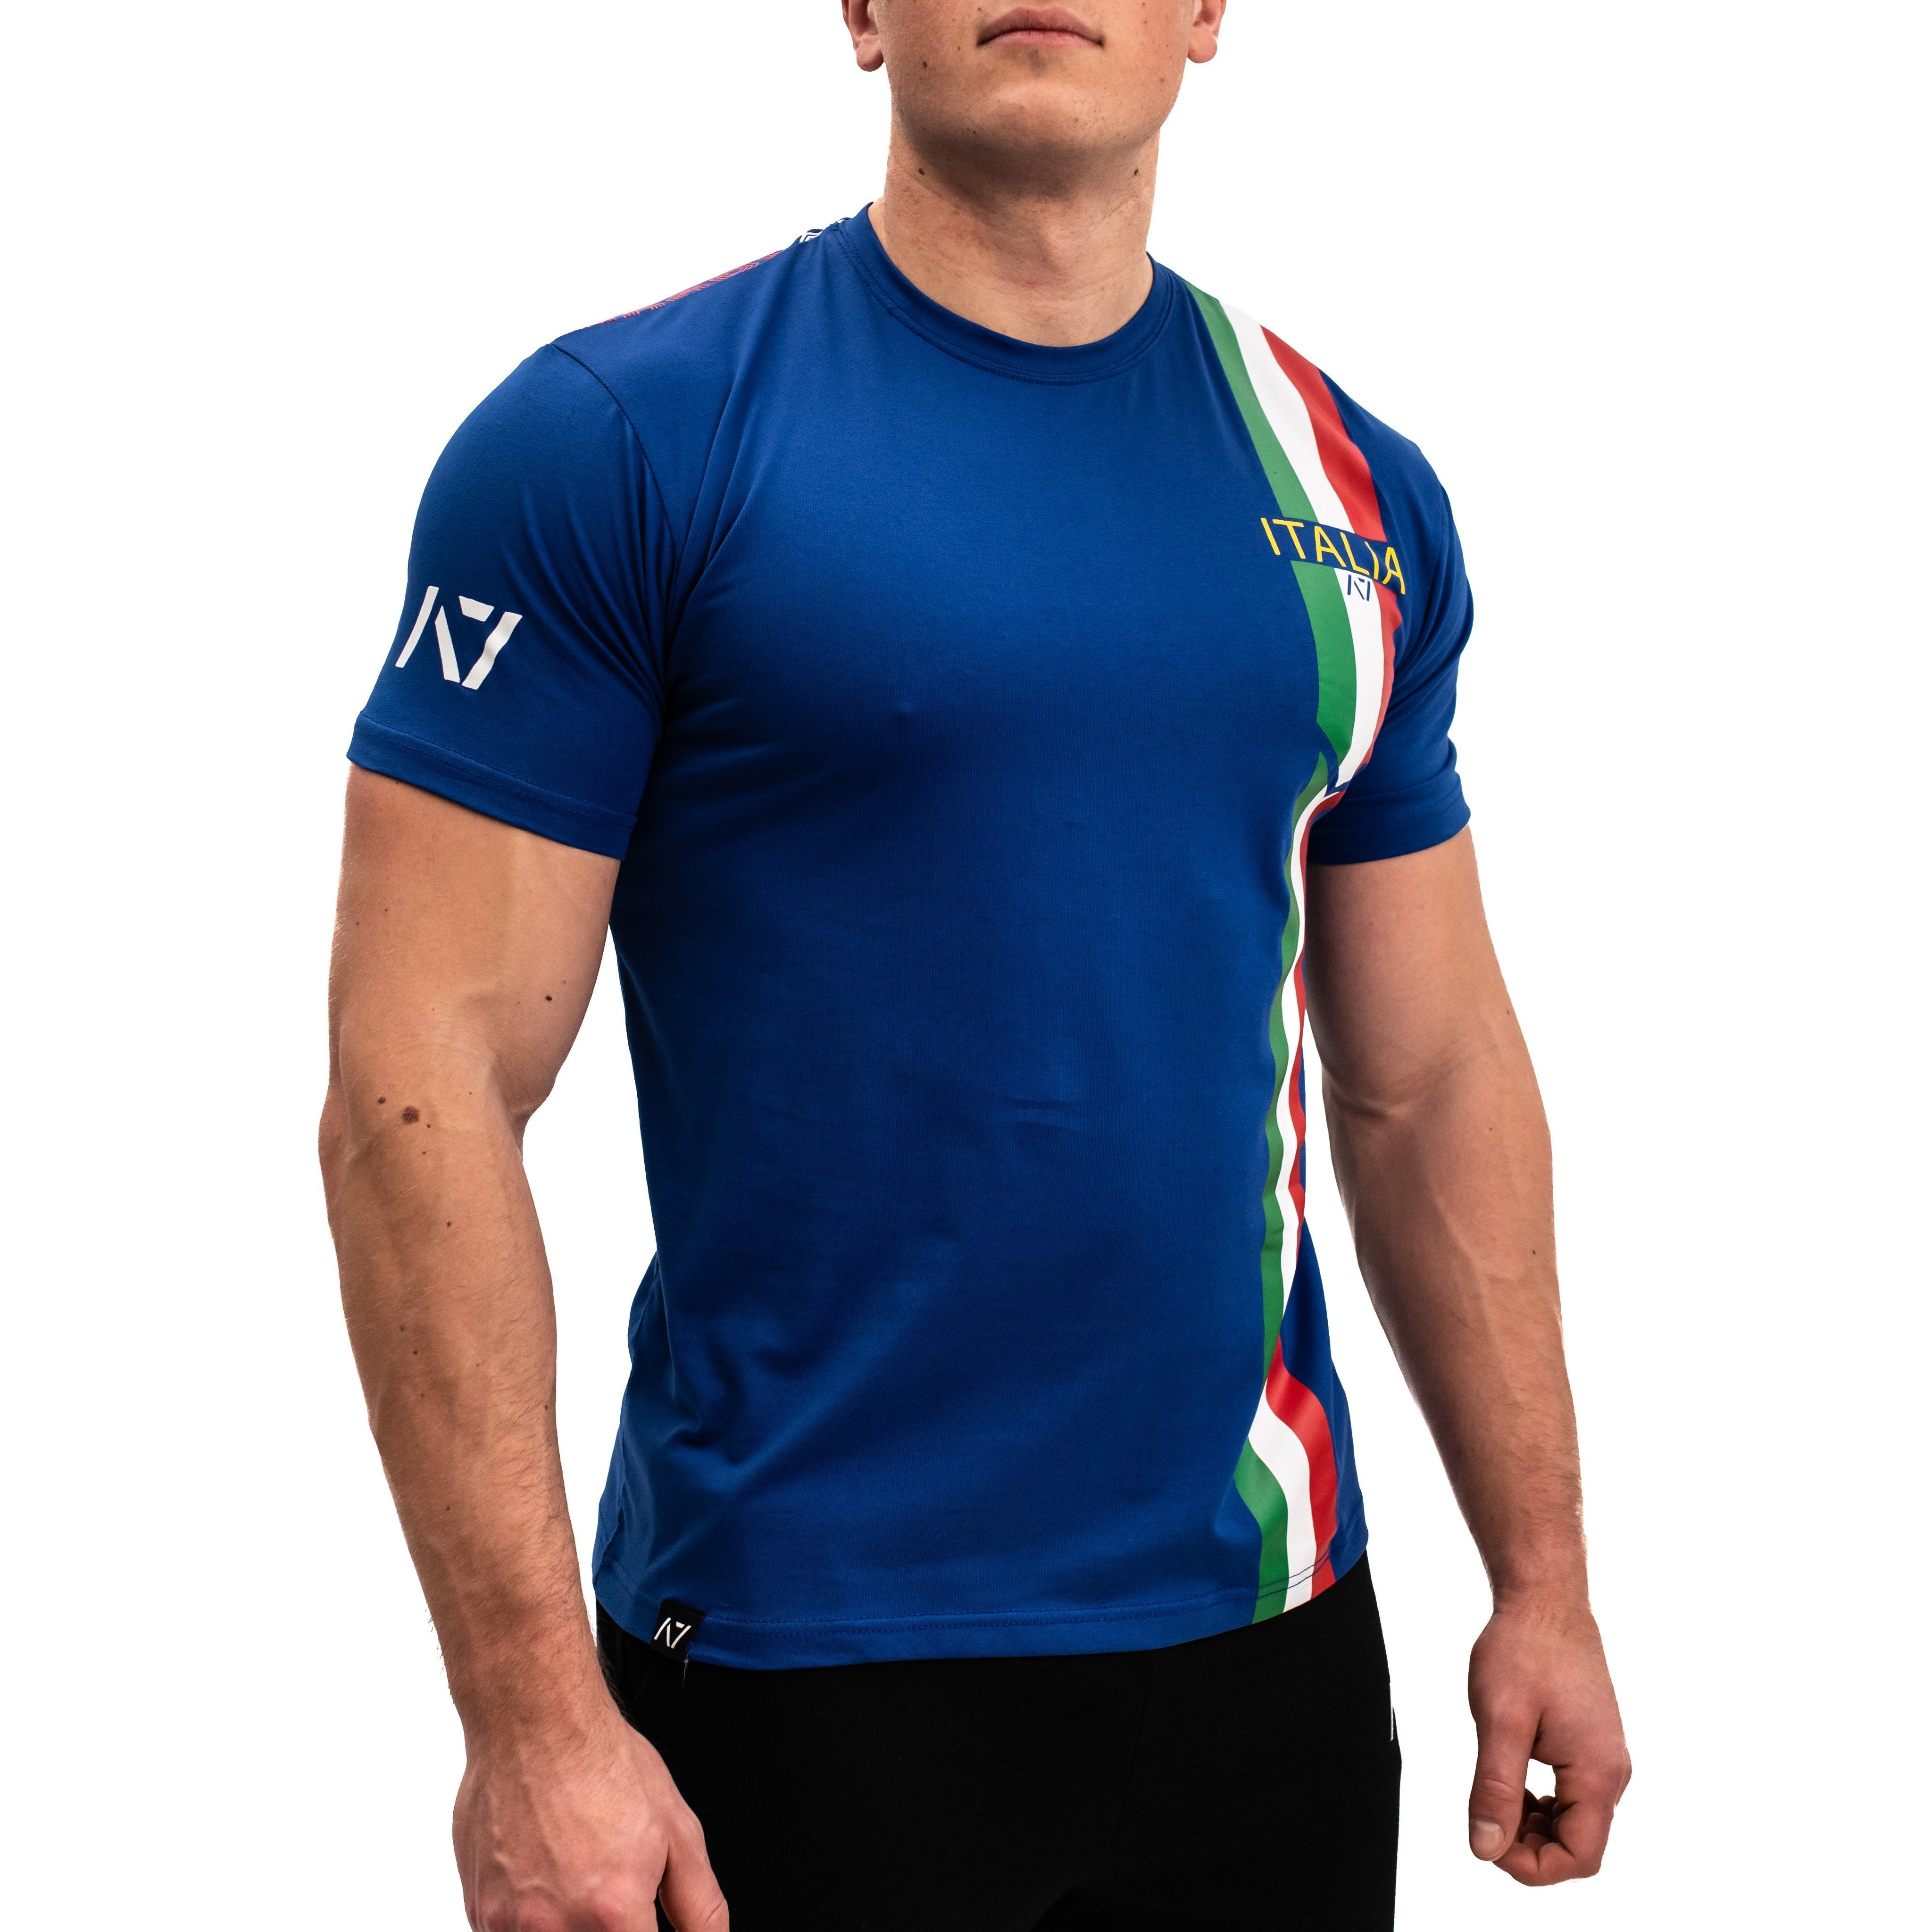  A7 Italia Bar Grip T-shirt is great as a squat shirt as well as for bench pressing. The perfect grip shirt. Purchase your Bar Grip tshirt in Europe and the UK from www.A7UK.com. Purchase Bar Grip Shirt Europe from A7 UK. Best Bar Grip Tshirts, shipping to UK and Europe from A7 UK. The best Powerlifting apparel for all your workouts. A7 Italy Bar Grip available in UK and Europe including France, Italy, Germany, Sweden and Poland